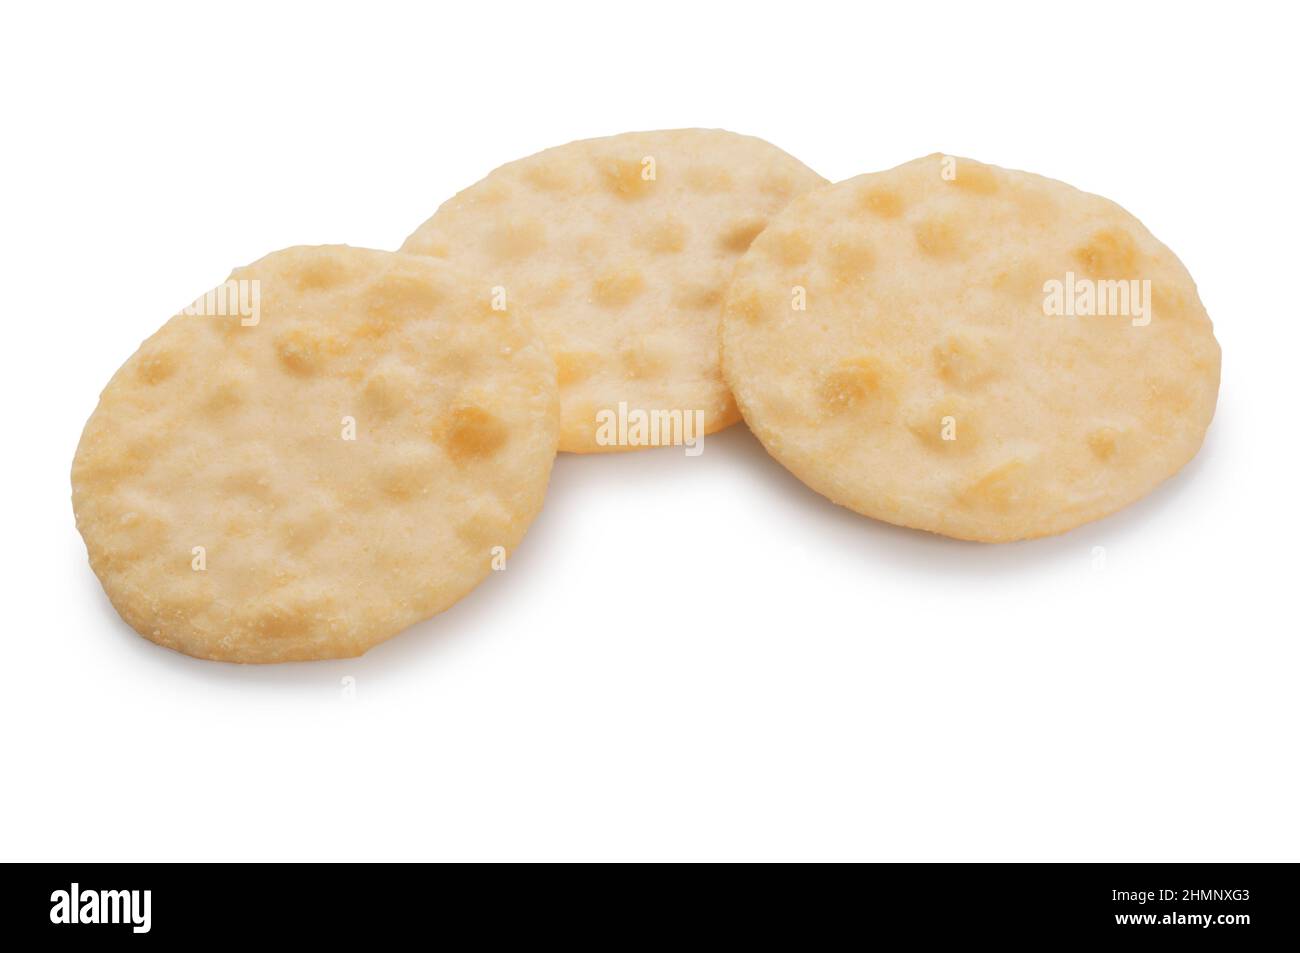 Studio shot of rice crackers cut out against a white background - John Gollop Stock Photo